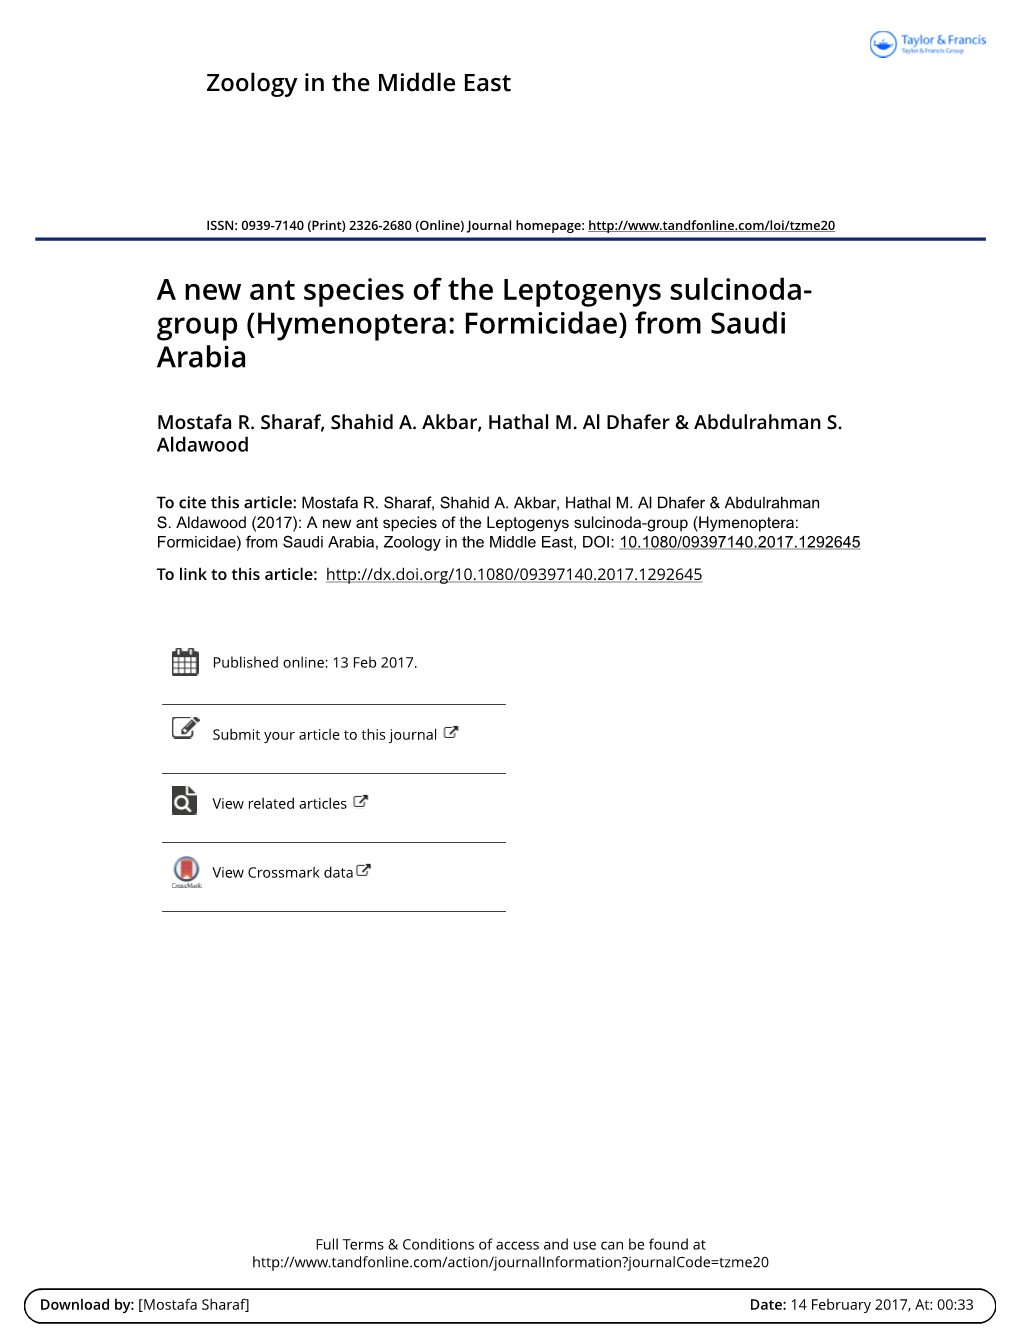 A New Ant Species of the Leptogenys Sulcinoda- Group (Hymenoptera: Formicidae) from Saudi Arabia